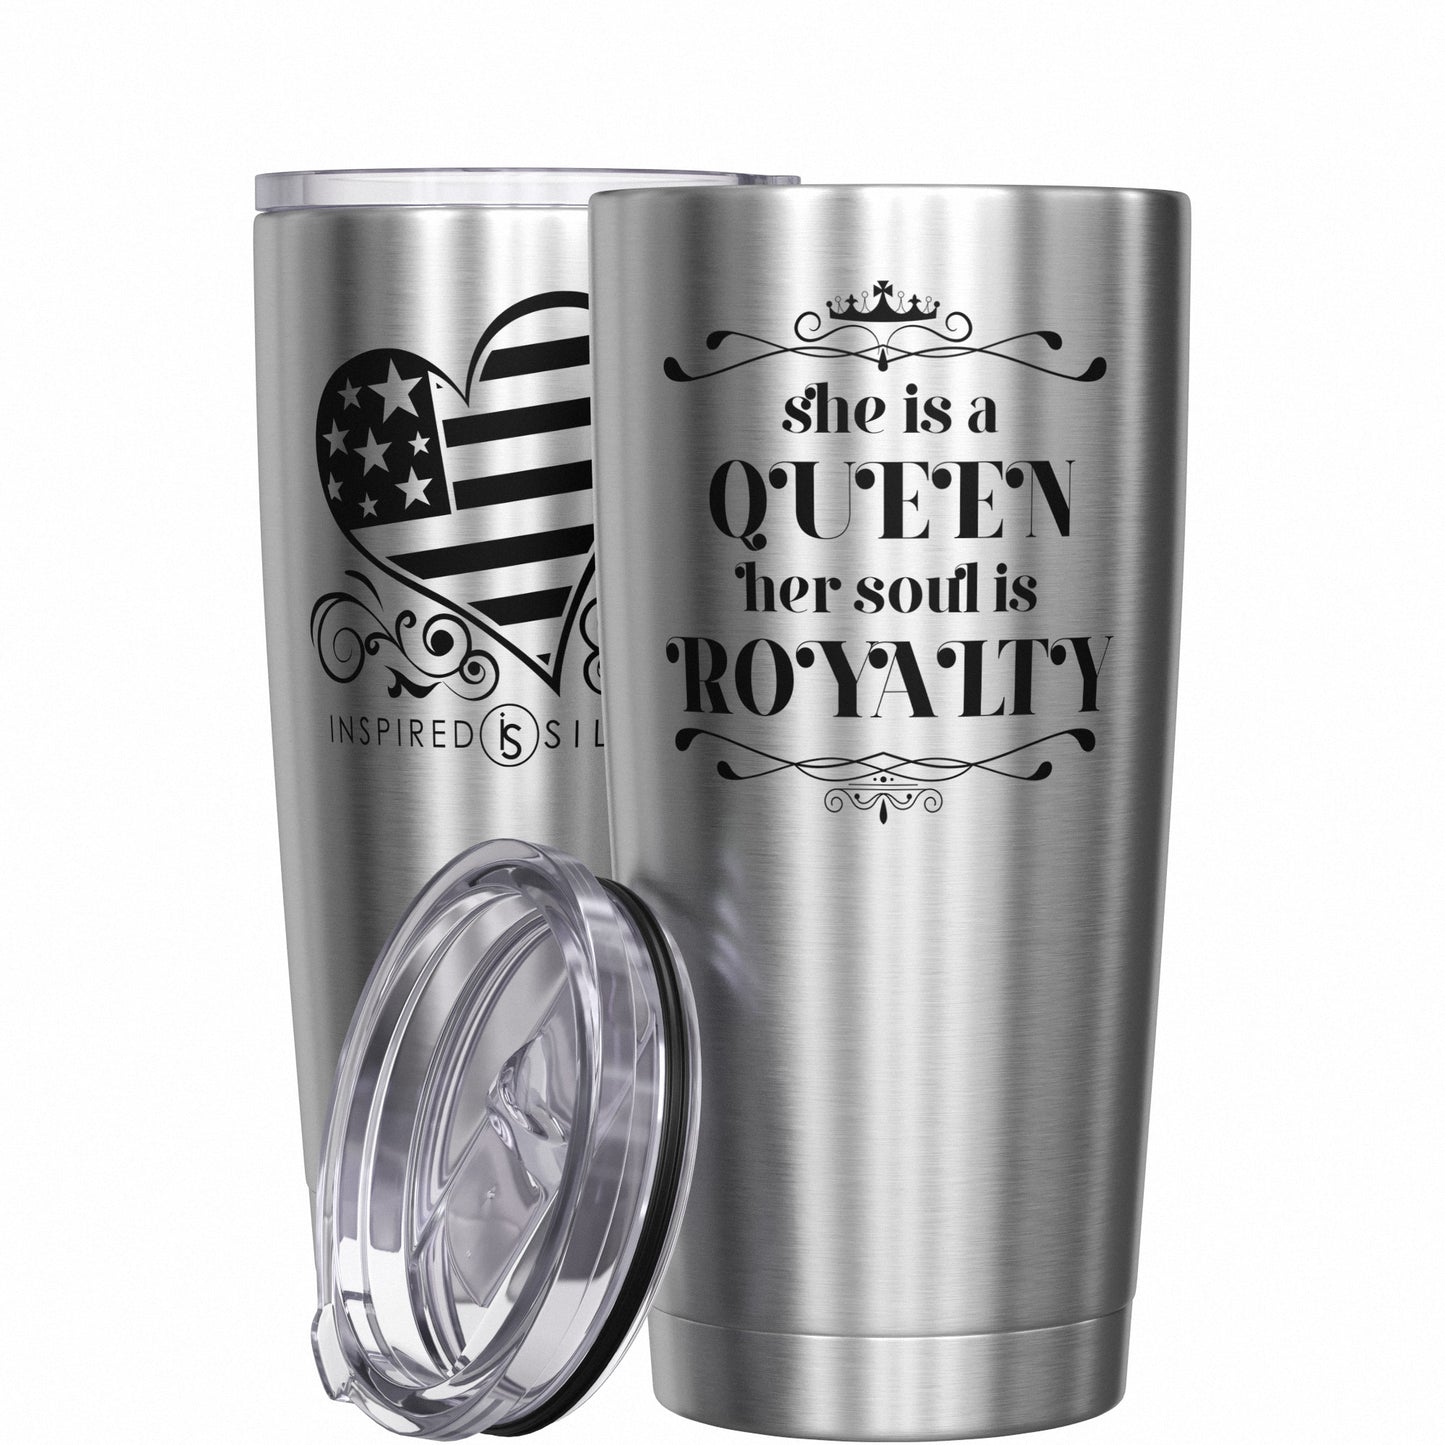 She Is a Queen - Her Soul Is Royalty Tumbler